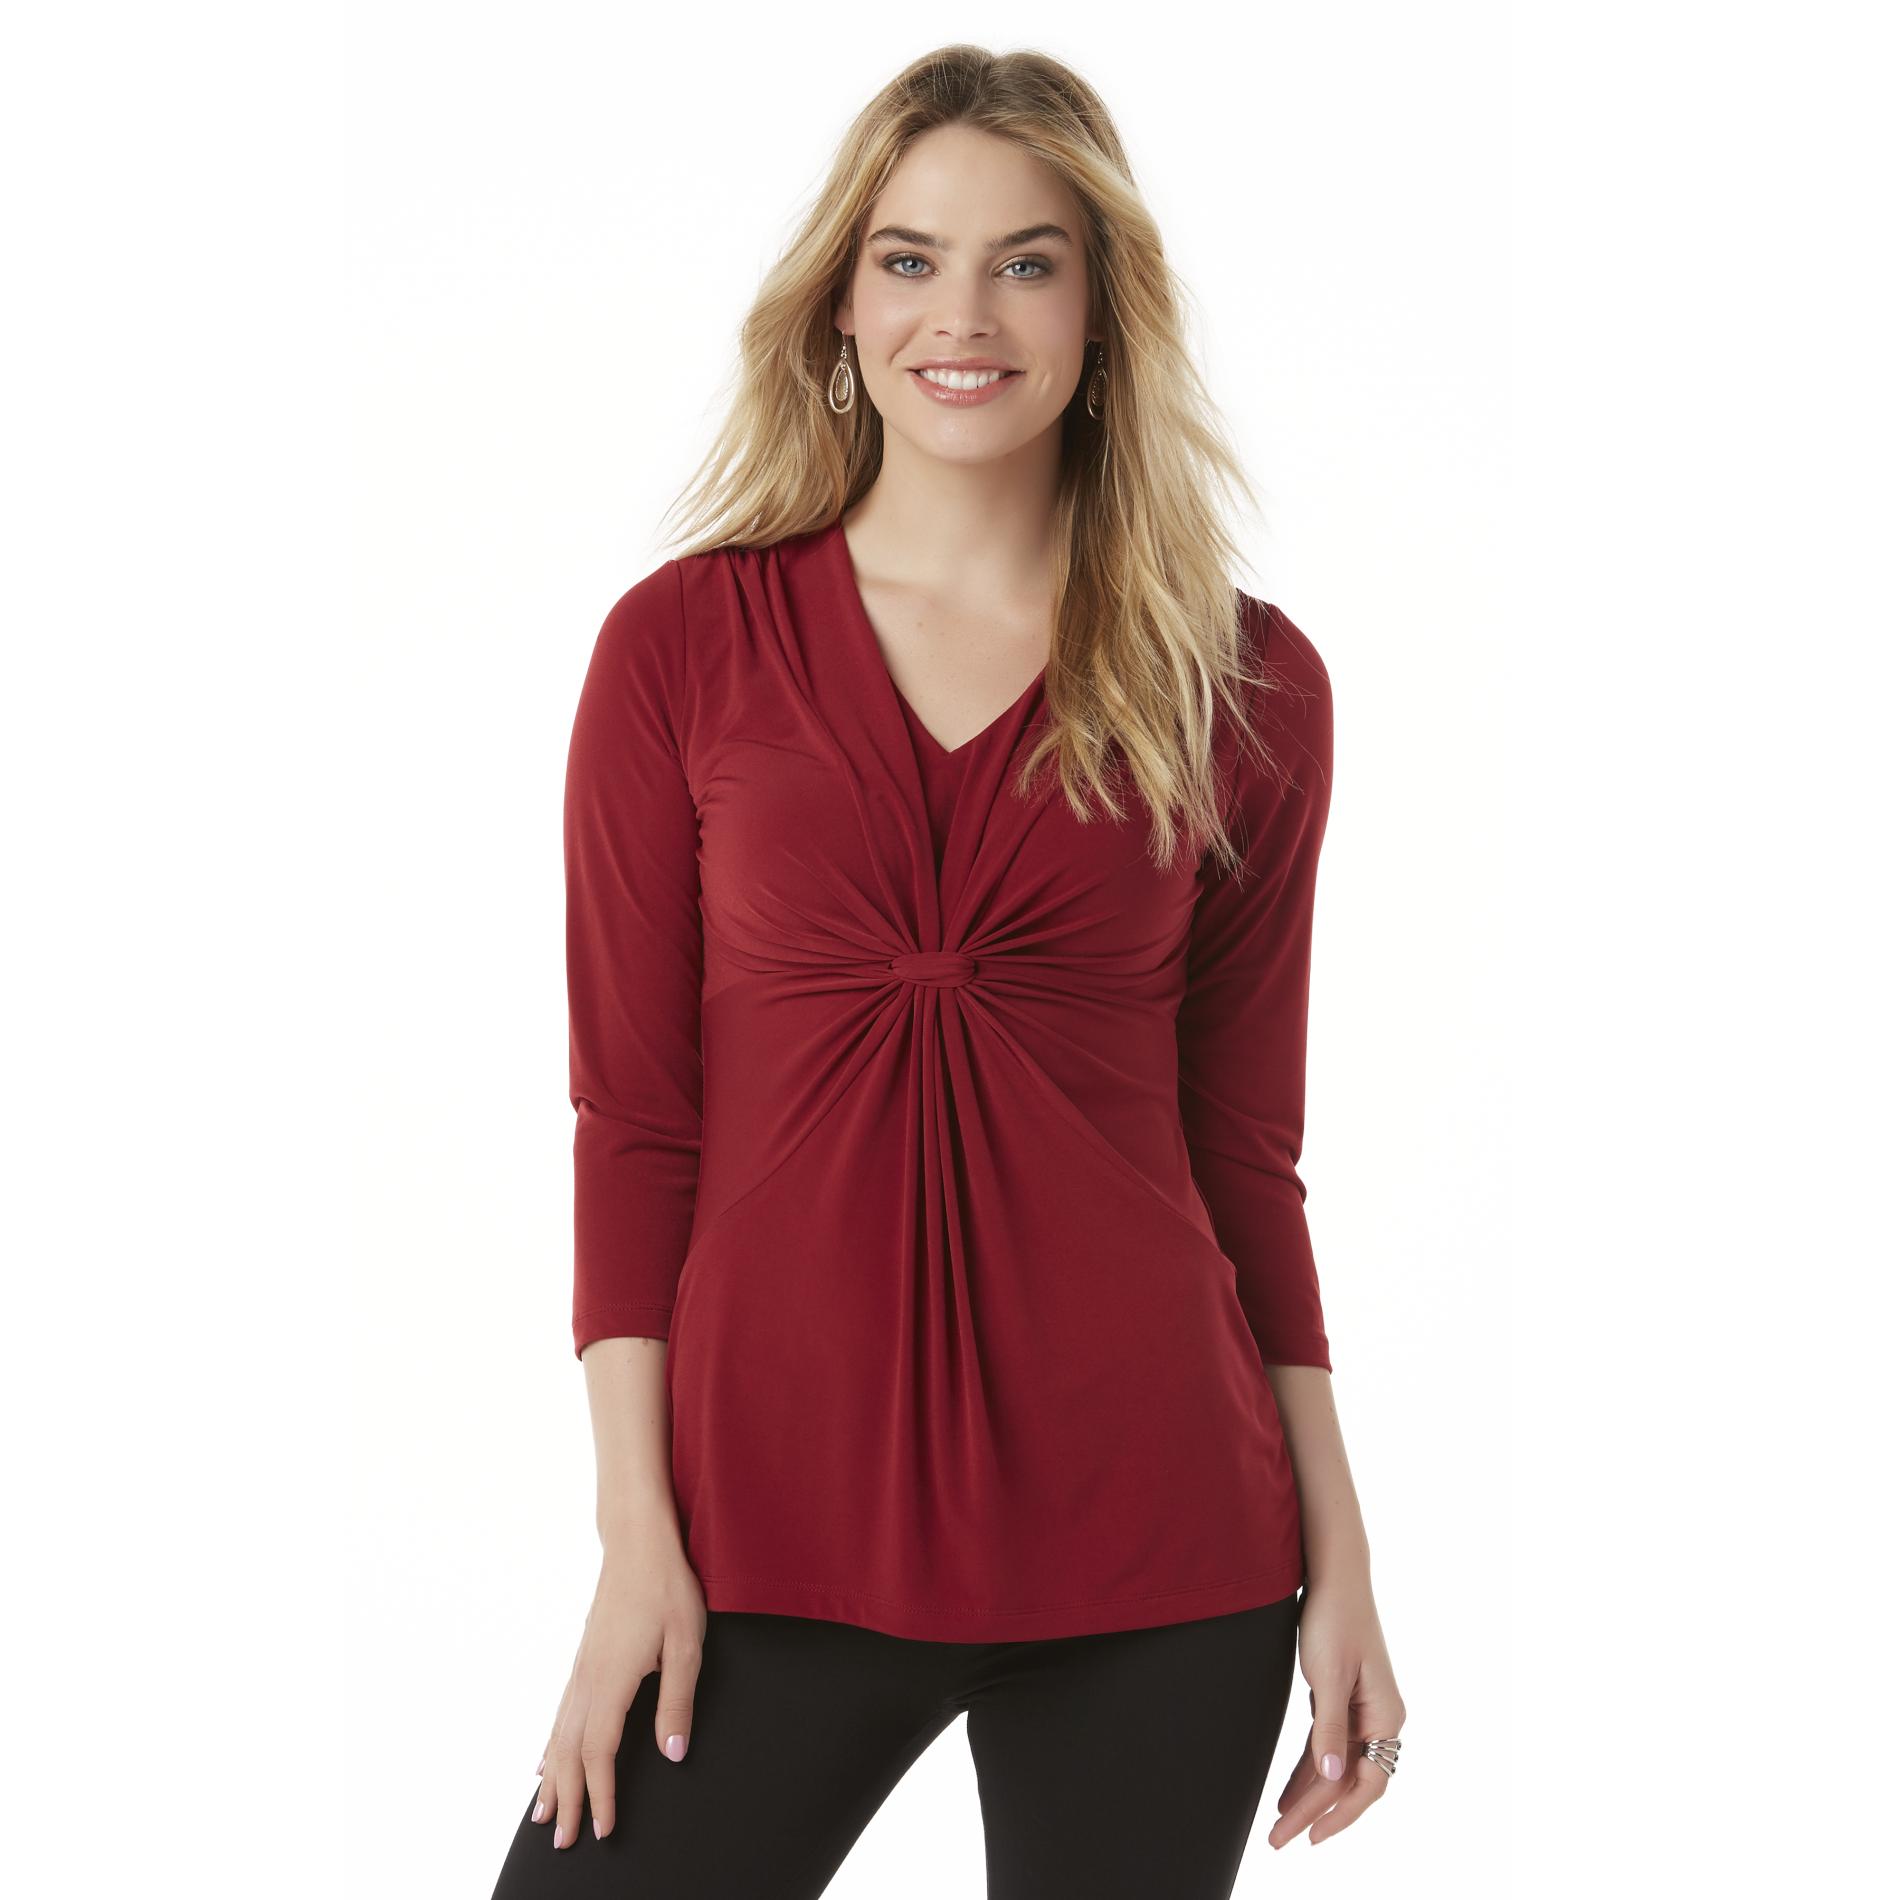 Attention Women's Knot Front Top